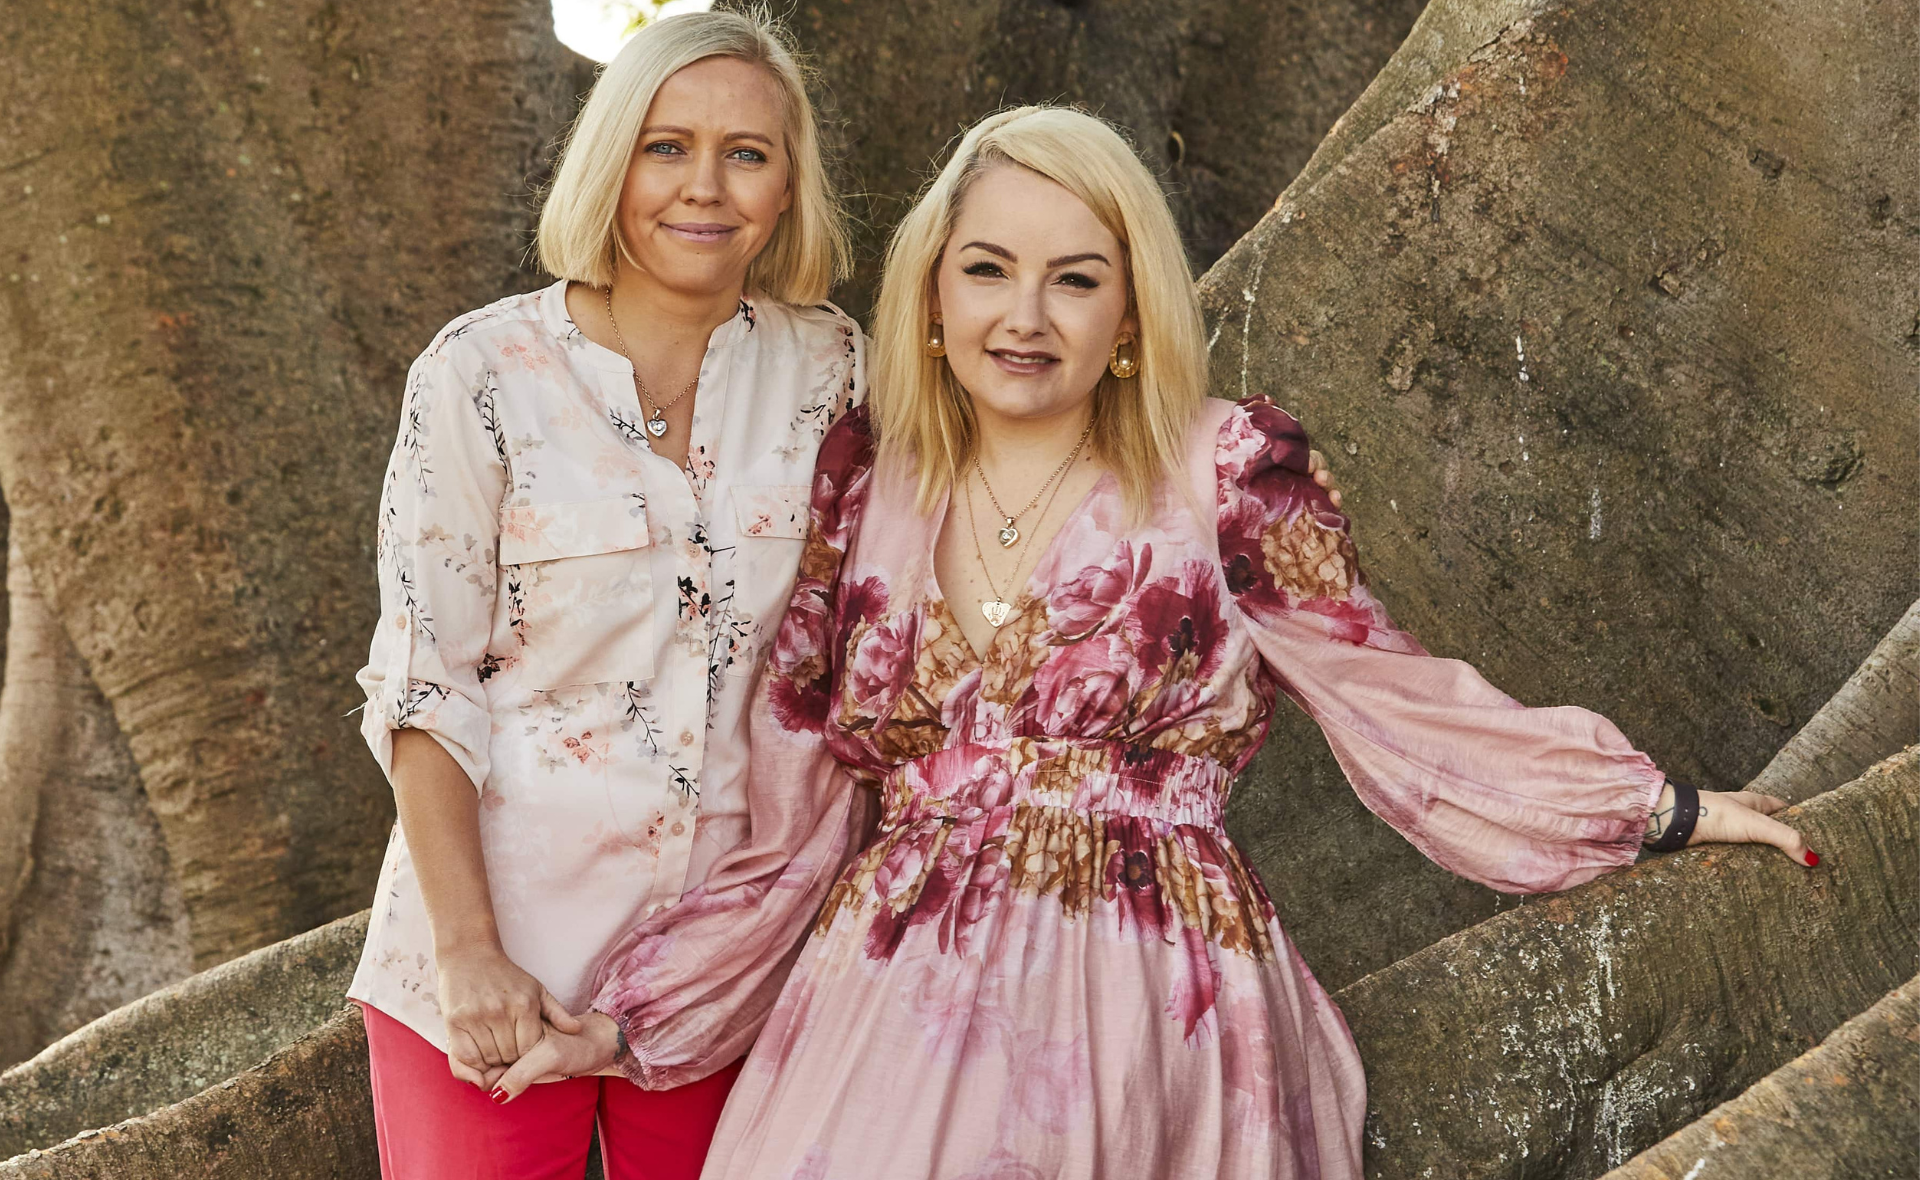 My Kitchen Rules stars Carly and Tresne open up on life after the passing of their daughter Poppy